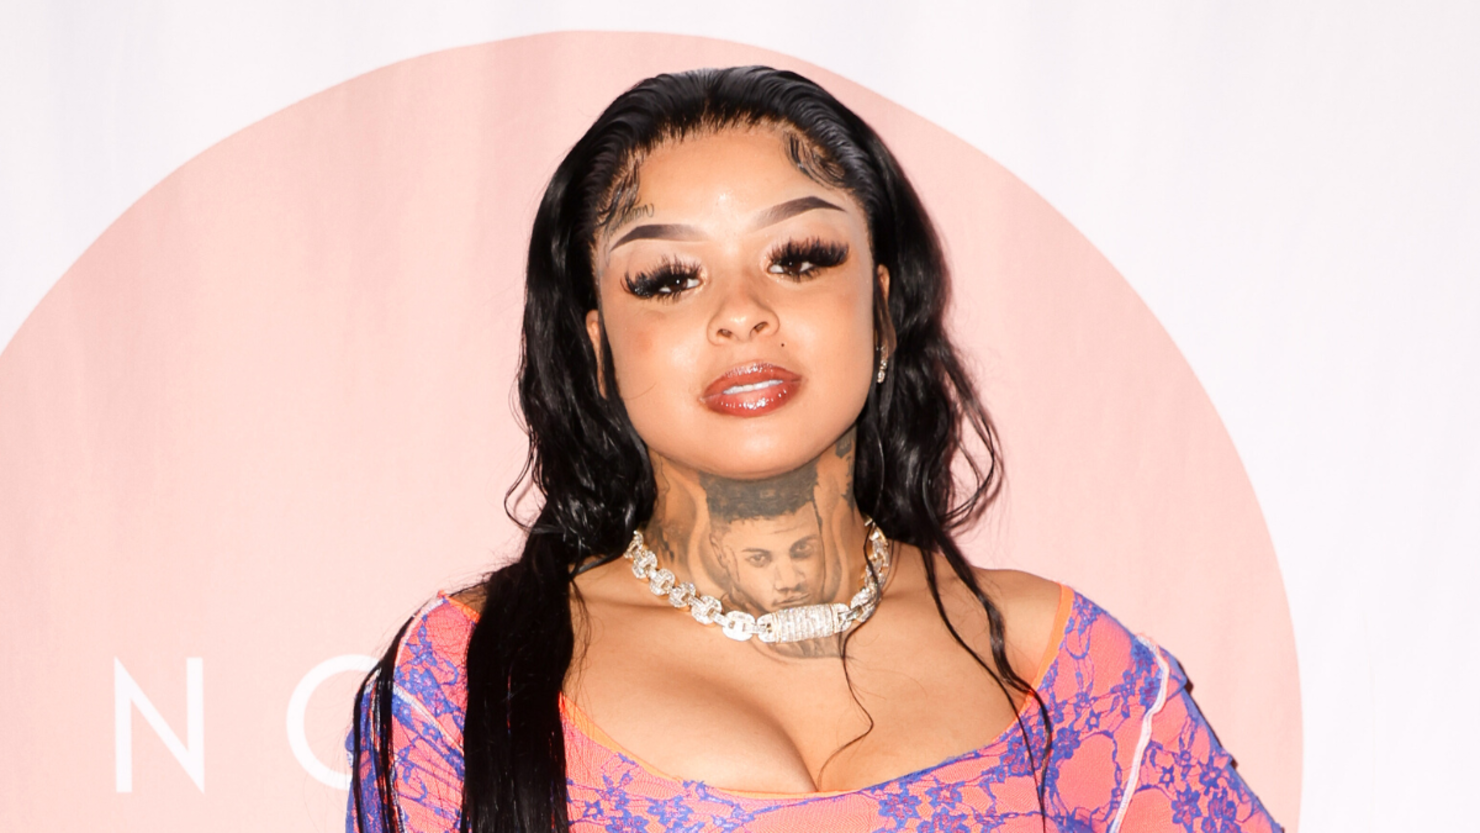 Chrisean Rock claims Blueface has more naked photos of his kids